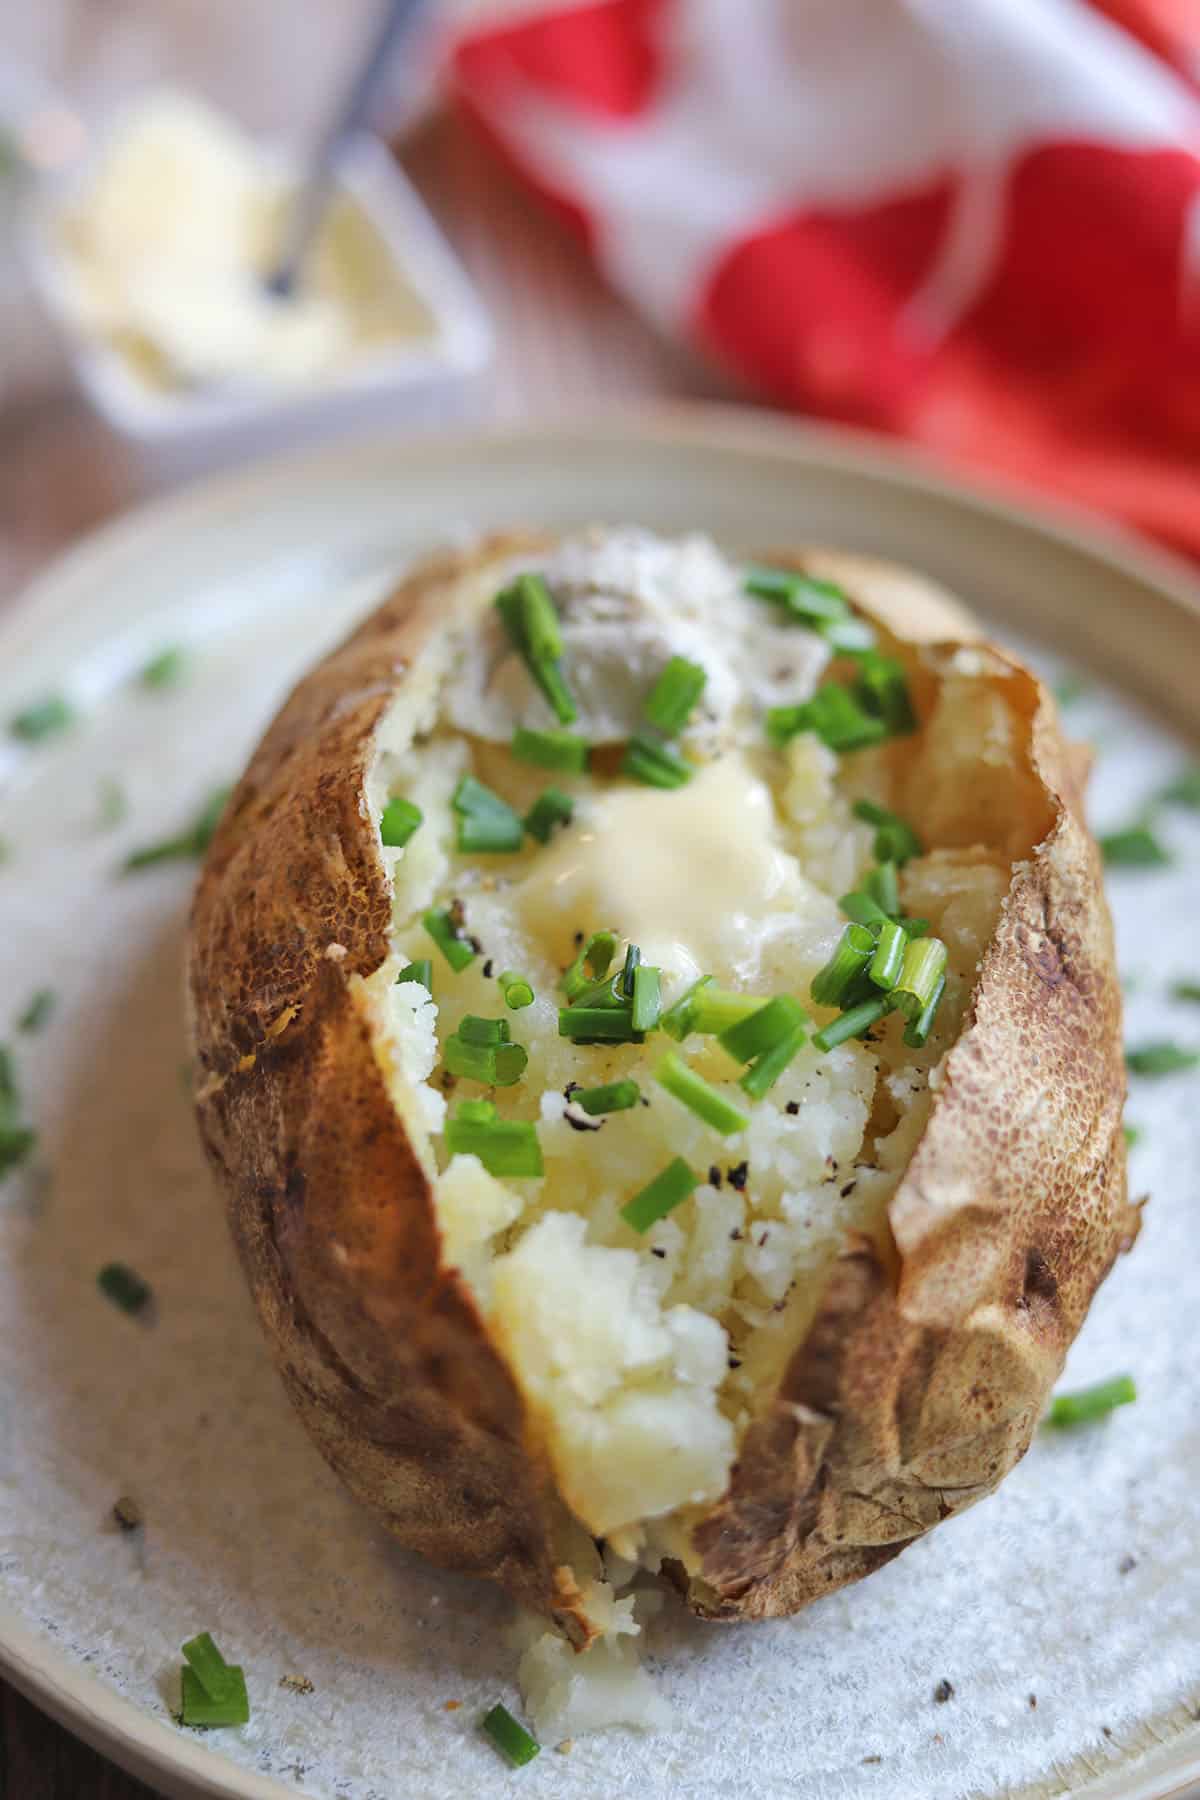 A baked potato topped with chives and non-dairy butter on plate.